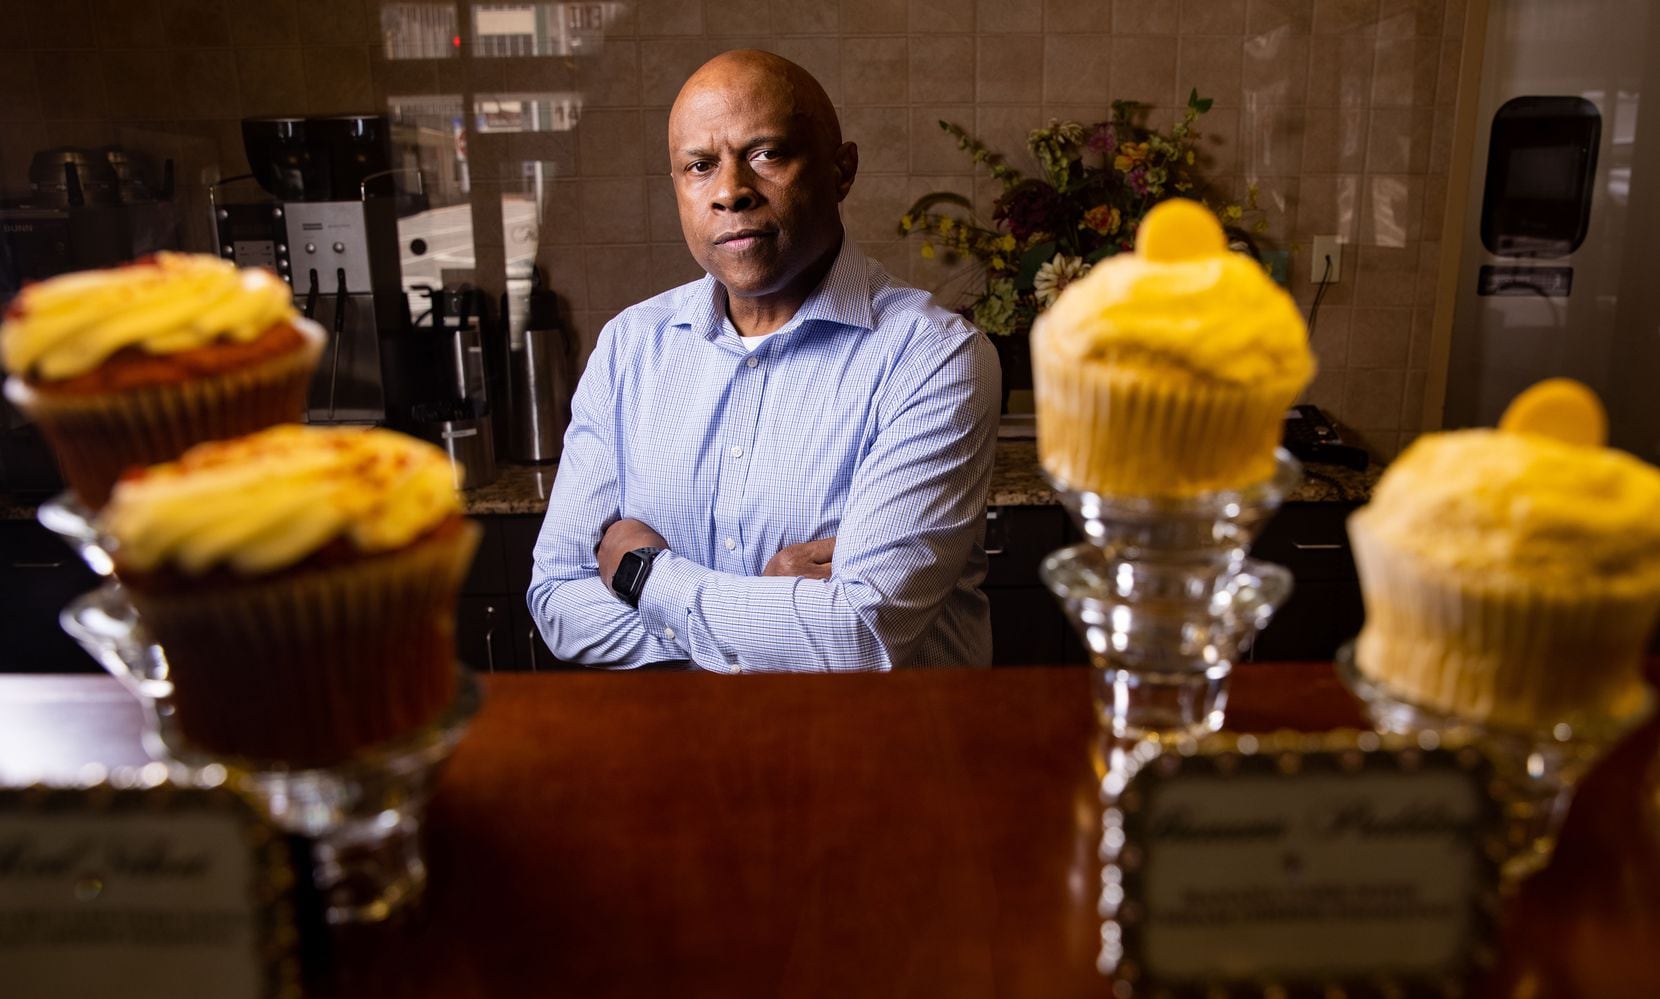 Owner Keith Fluellen posed behind the display counter of Fluellen Cupcakes on May 5 in...